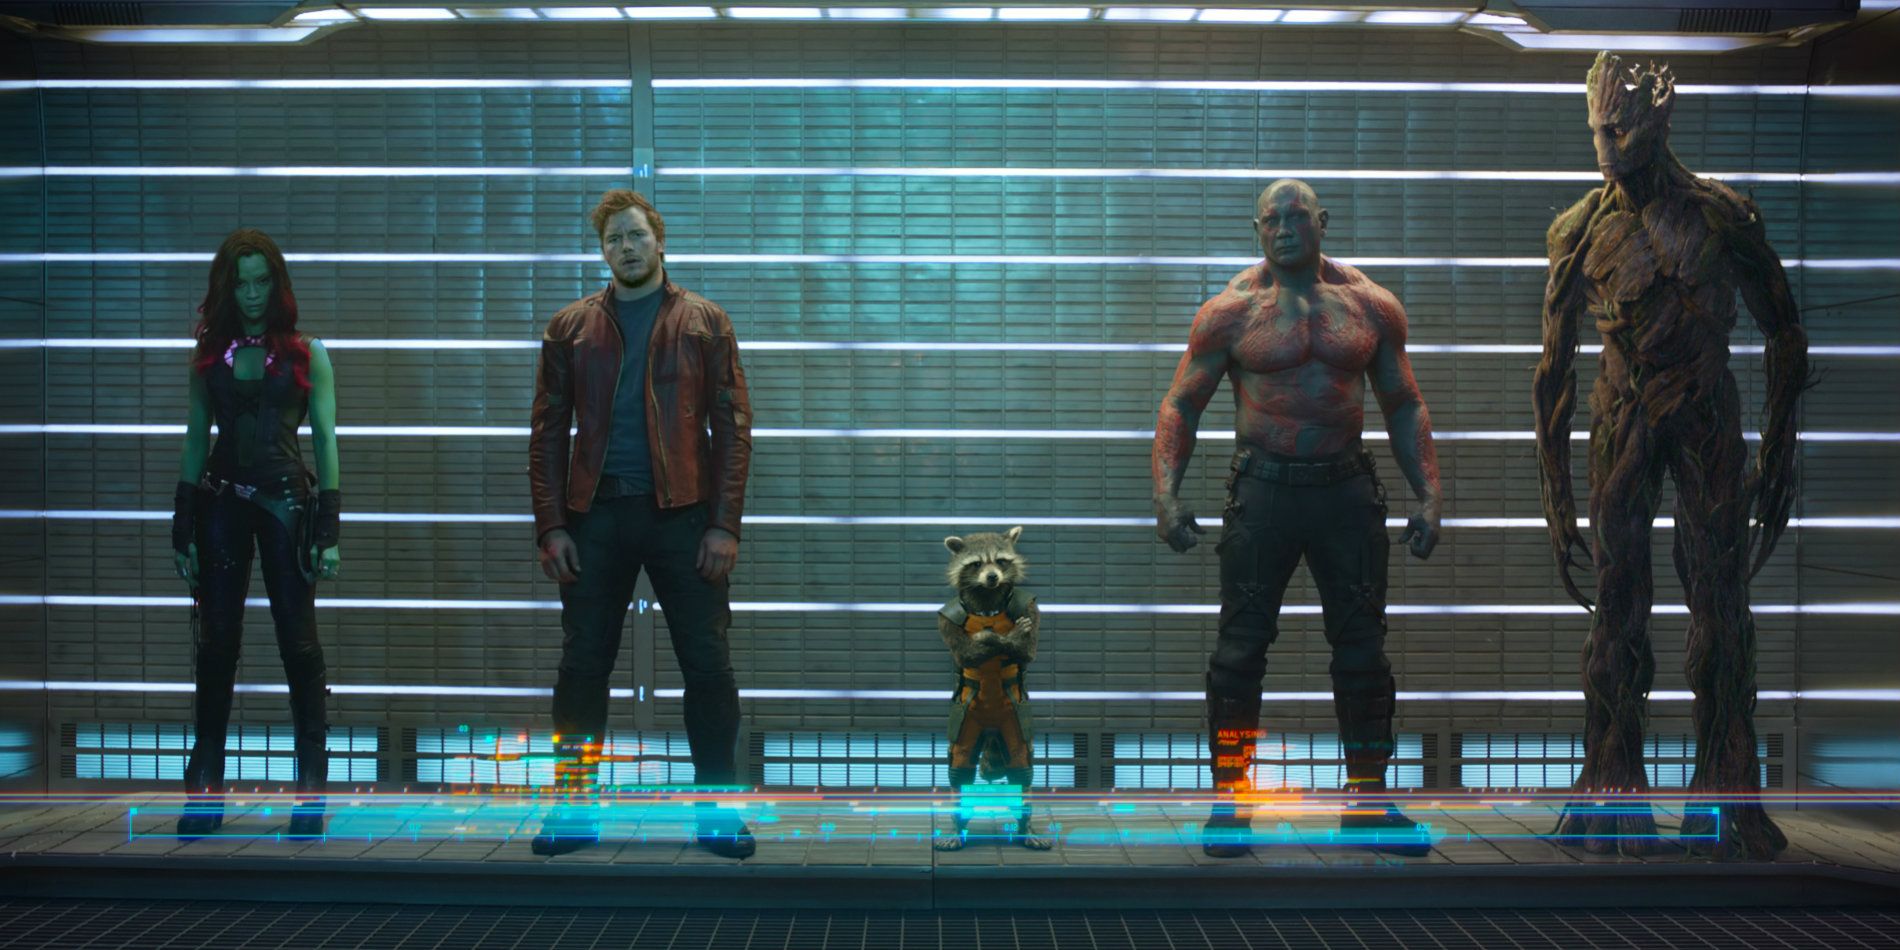 The characters line up in Guardians of the Galaxy